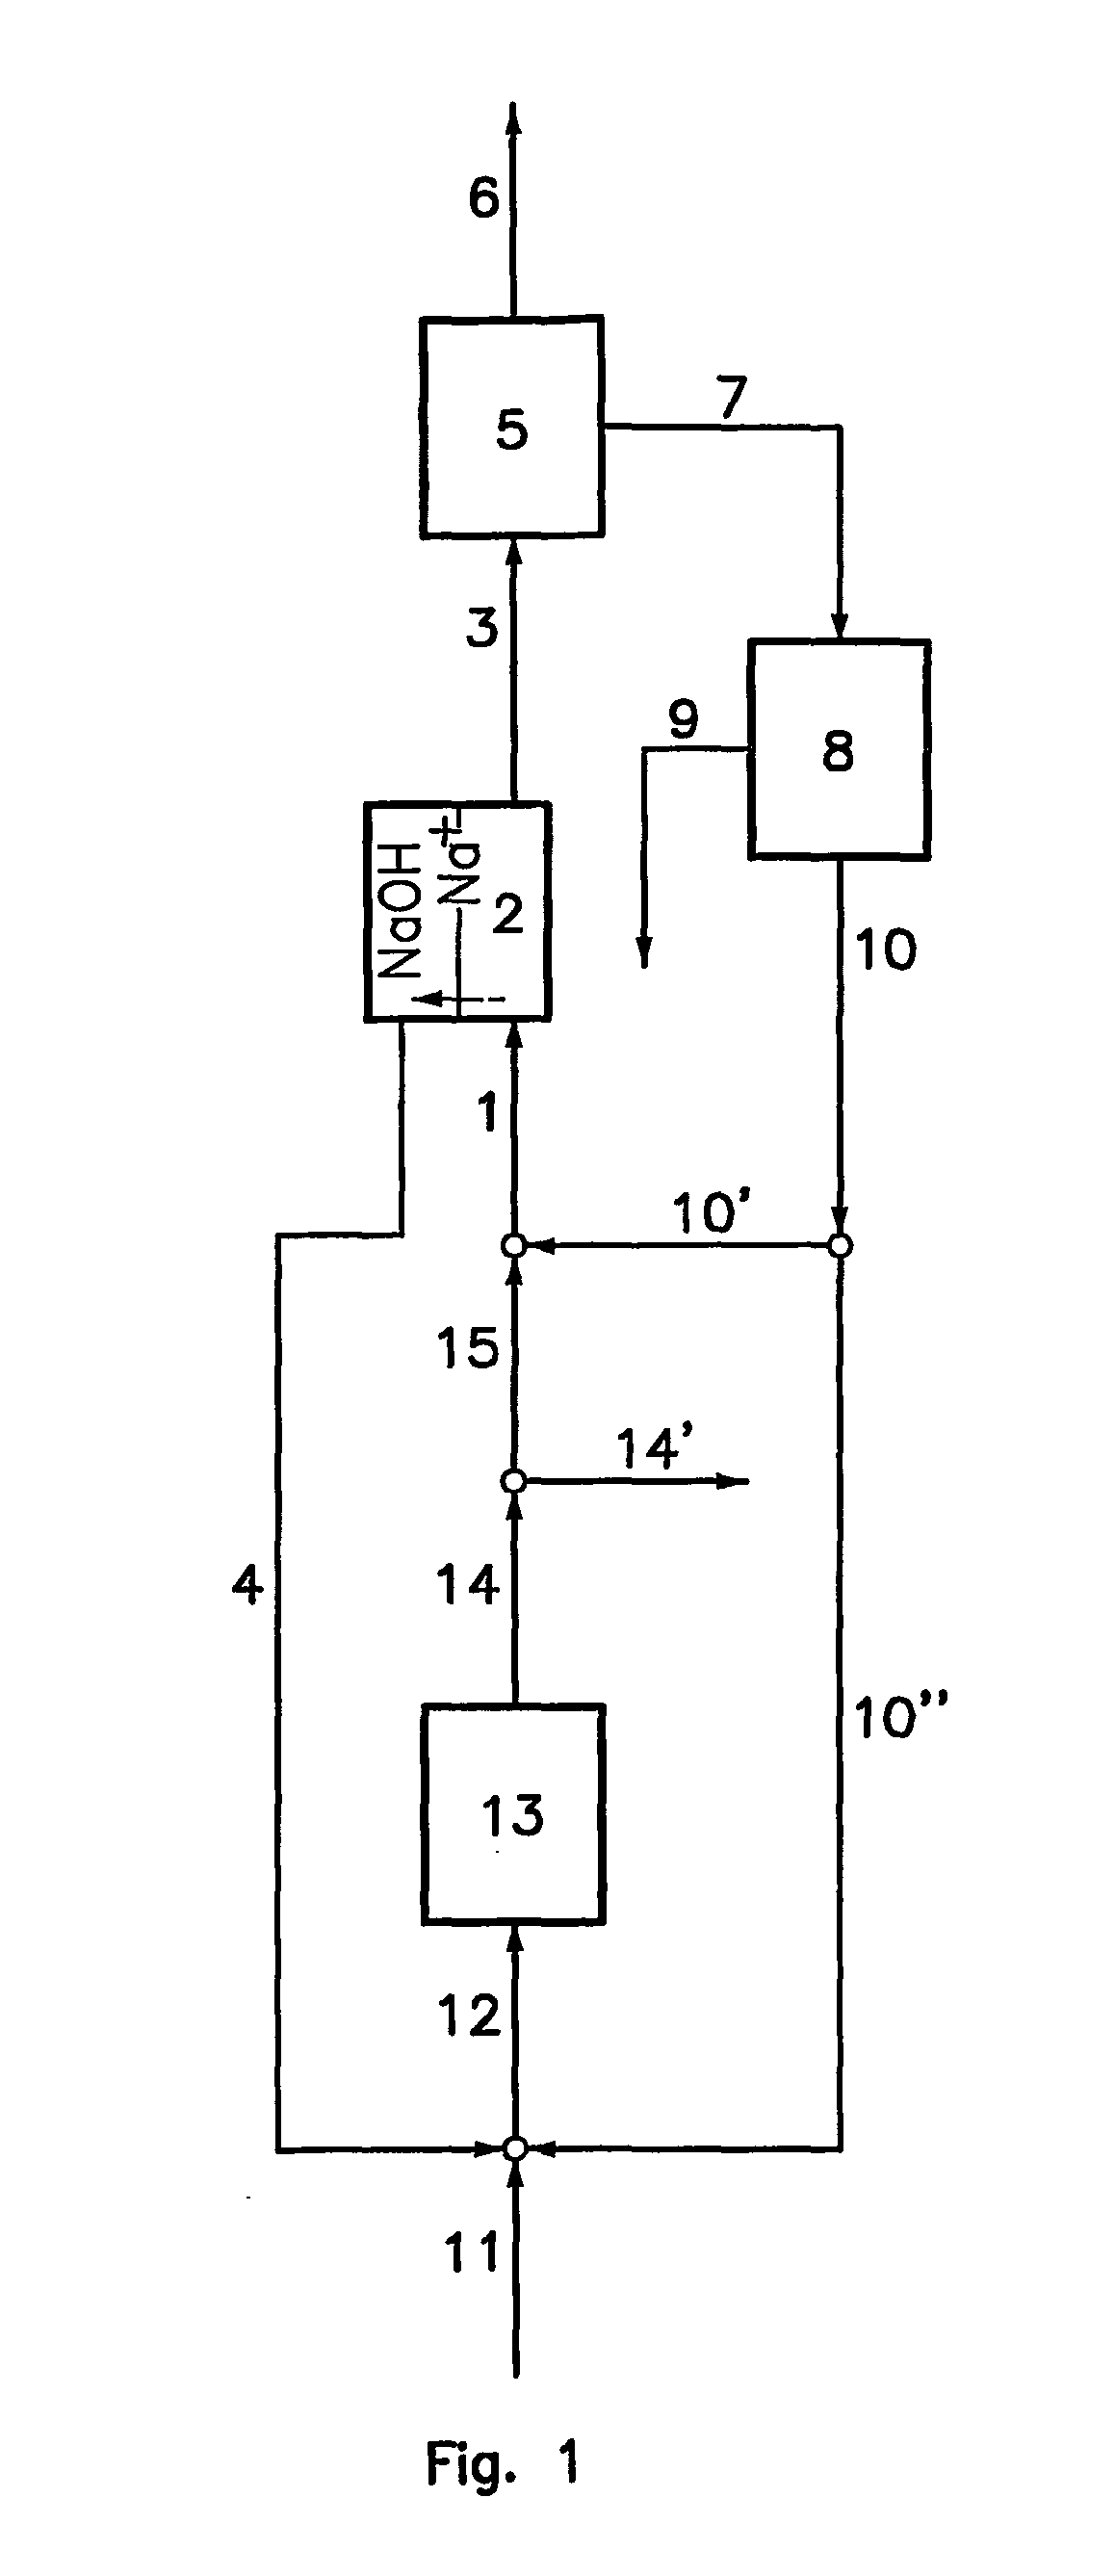 Process for producing sodium carbonate and/or sodium bicarbonate from an ore mineral comprising sodium bicarbonate